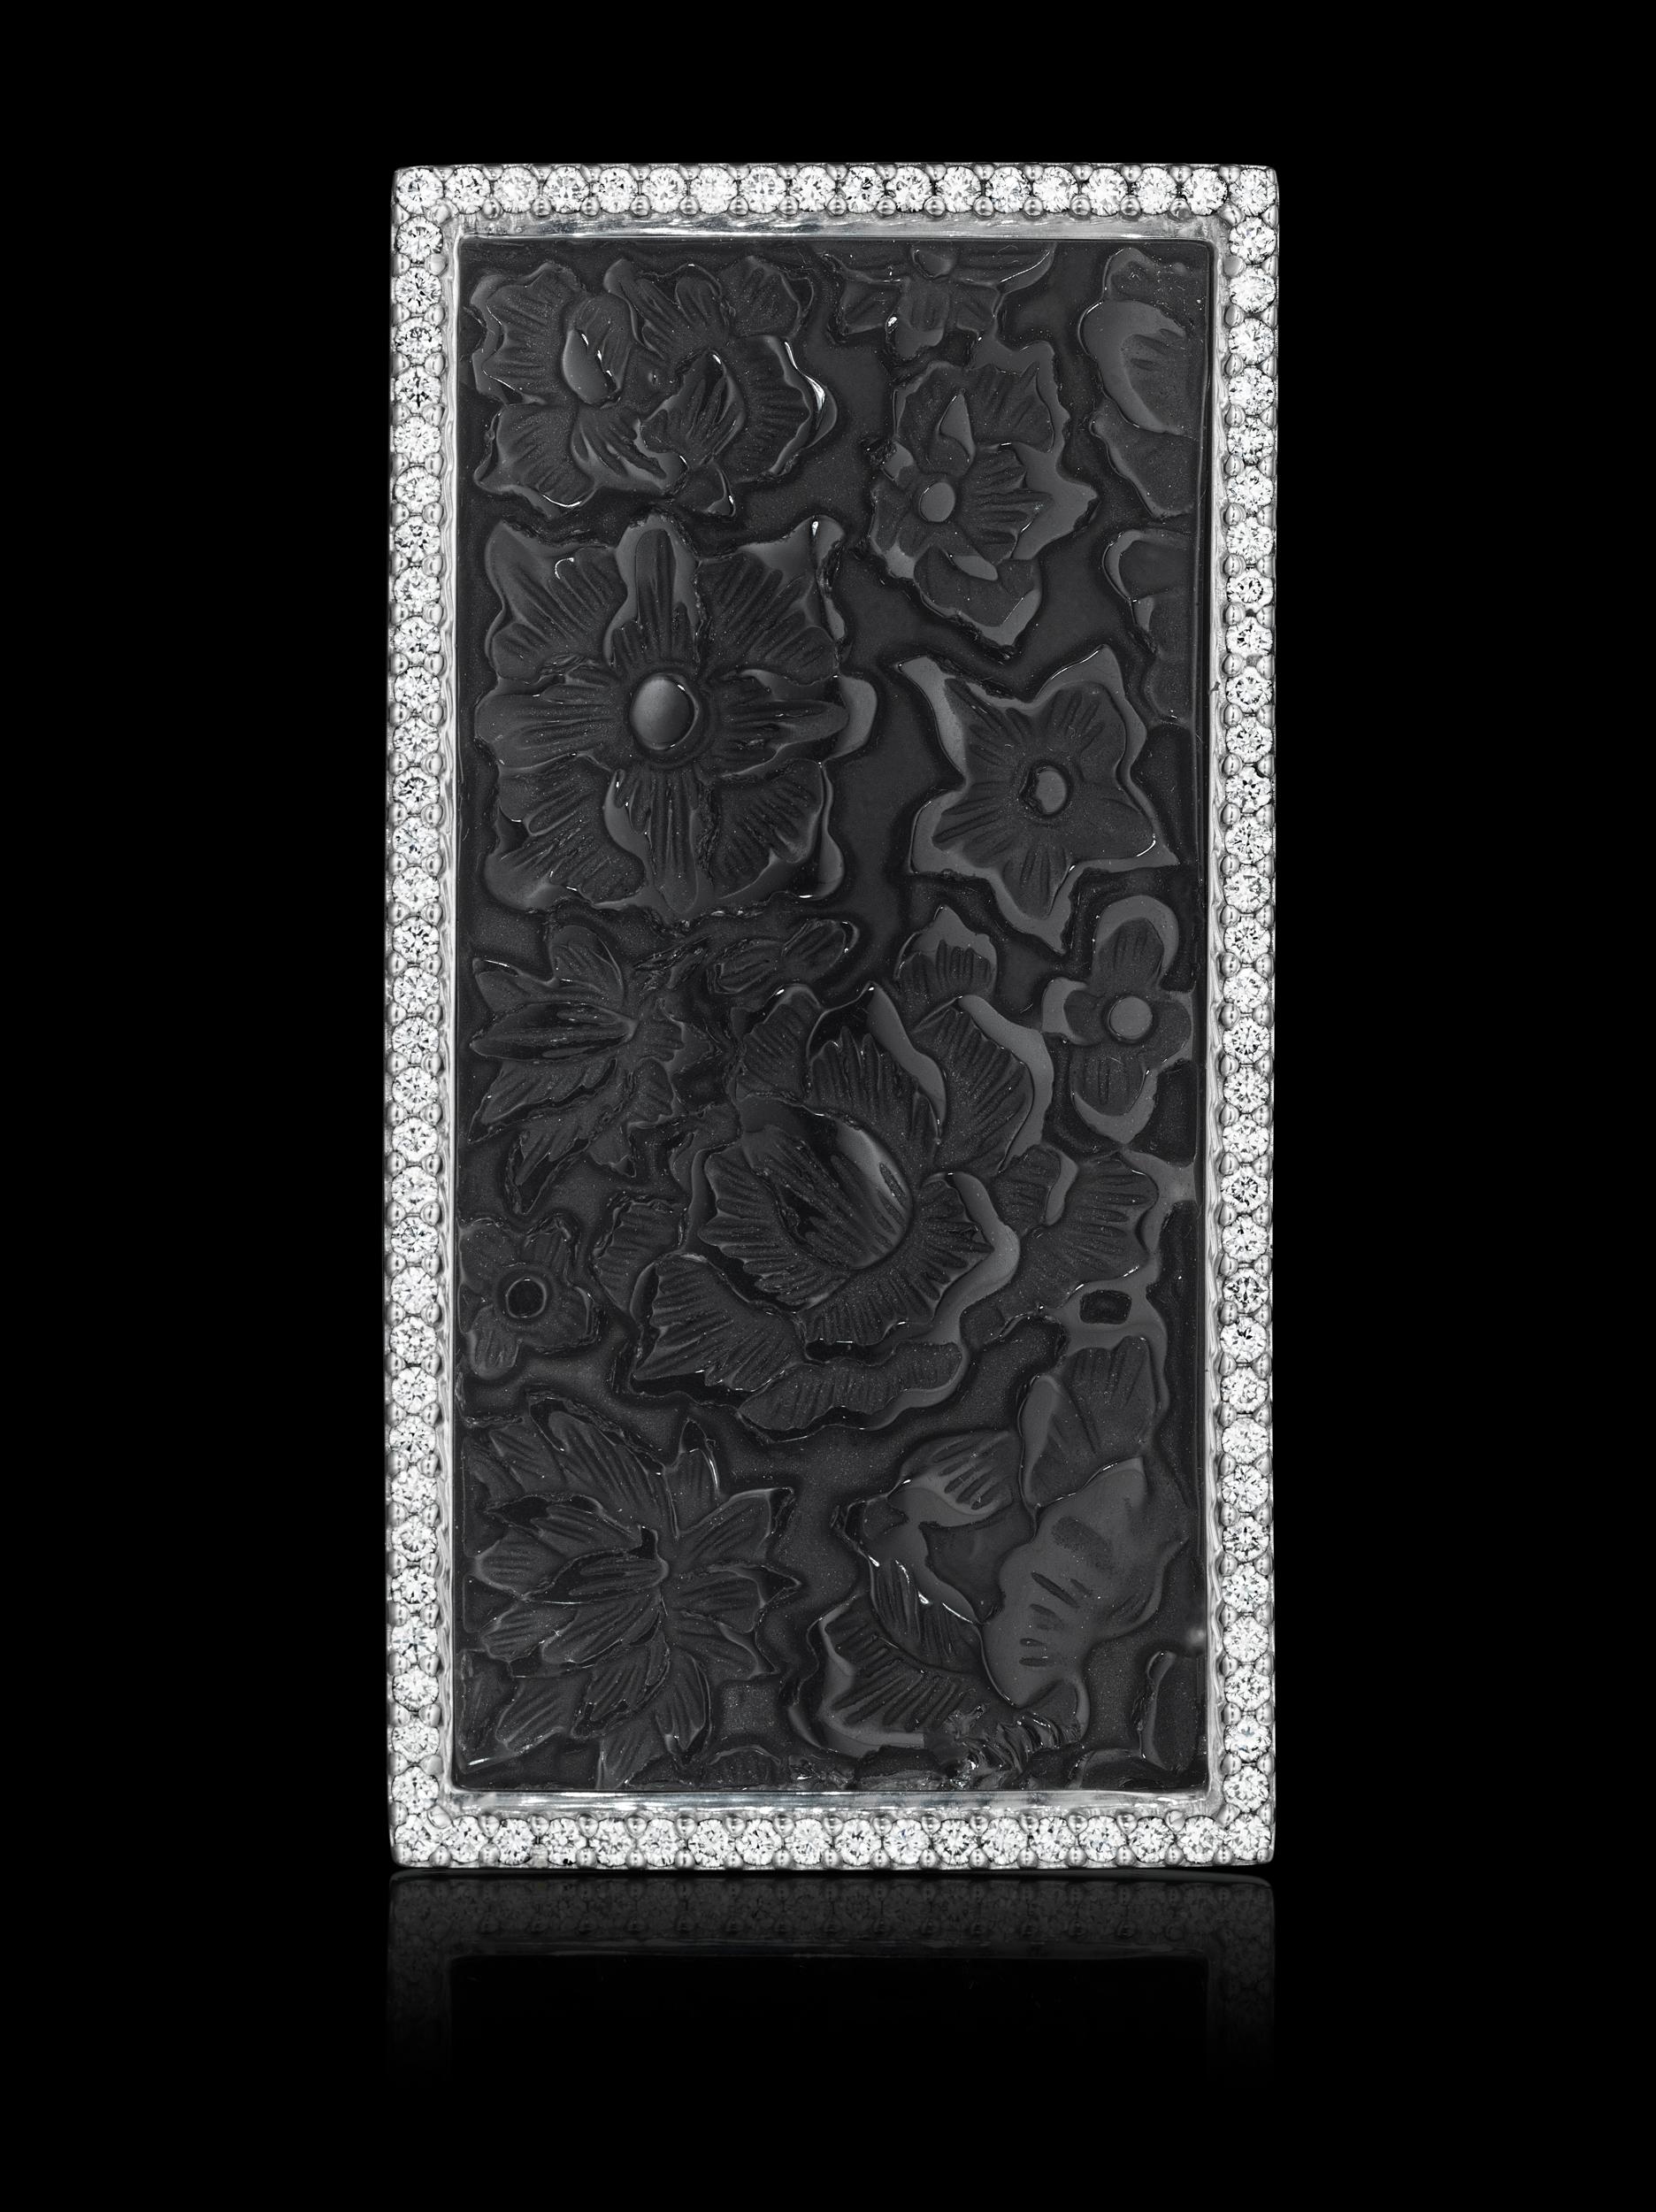 One-of-a-kind Convertible Brooach-Pendant YOKI Design. Piece features Carved Black Onyx and Diamonds set in 18k white gold. 

Centerstone: Carved Onyx, 52.84x26.55mm, 65.7cts. (approx.)

Side Stones: 90 Round diamonds, 1.7cts. (approx.)   

Piece